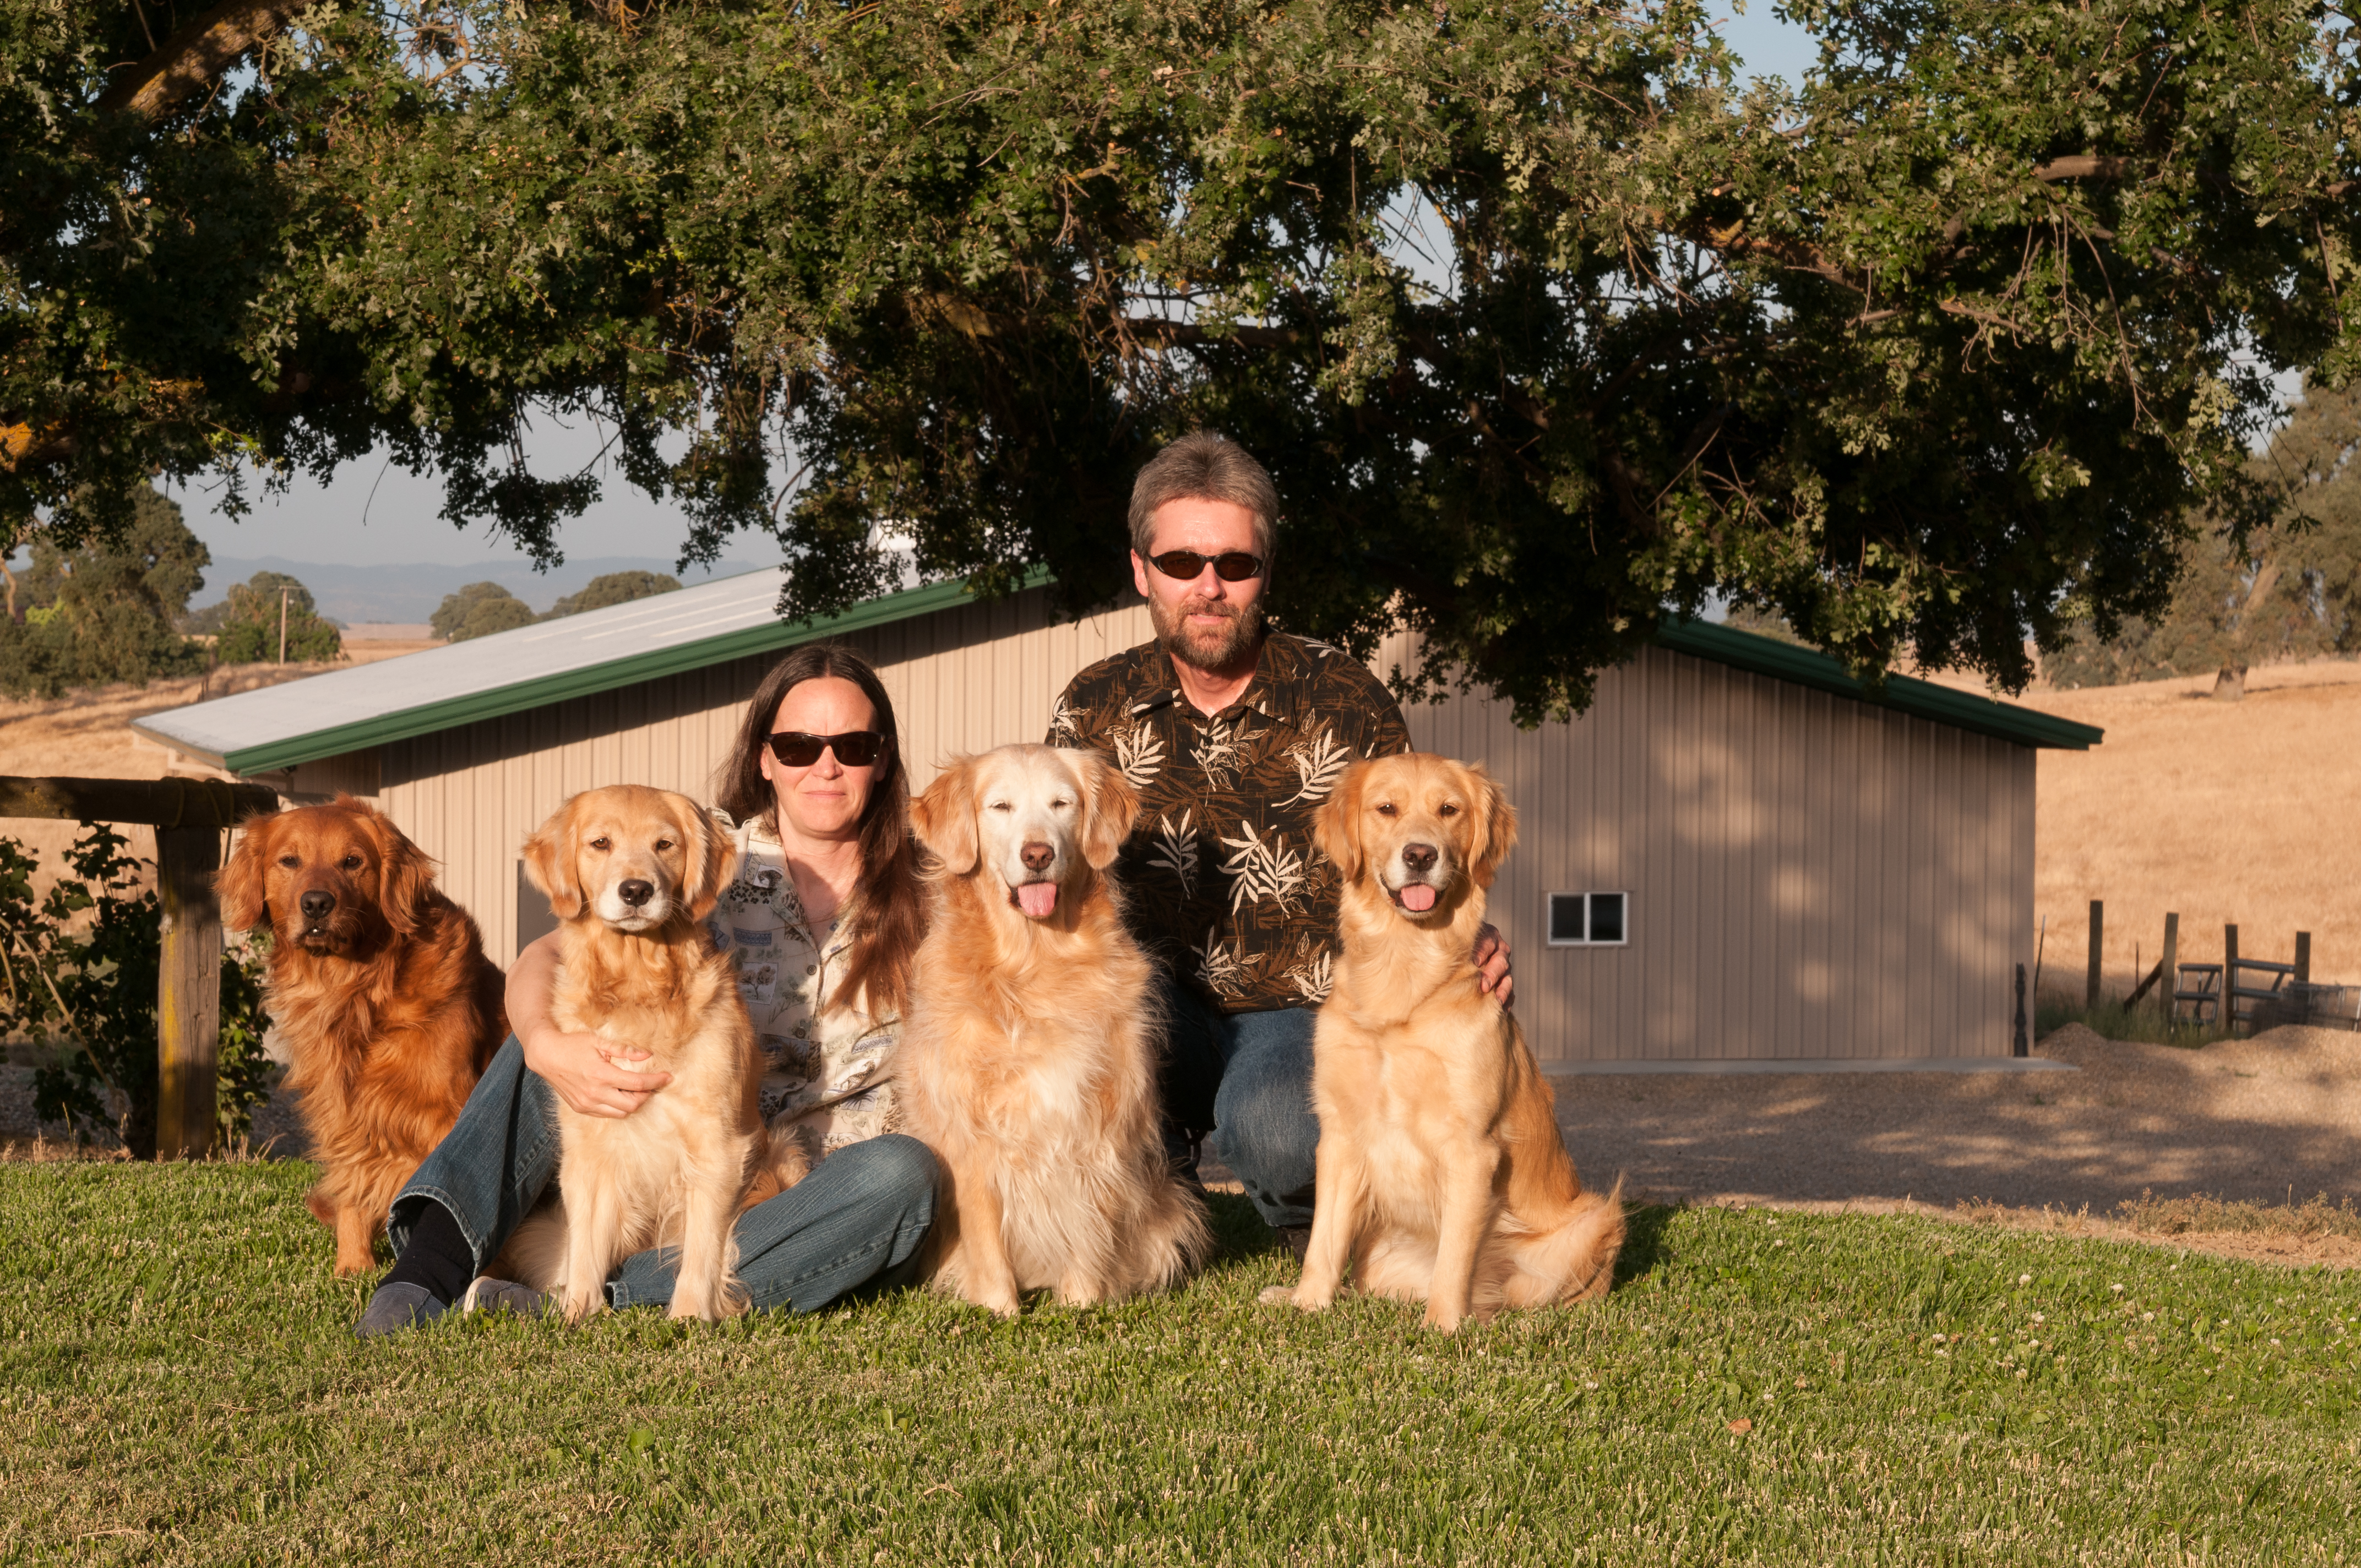 Dee Dee, Bill, and their dogs in front of the Dream Big Training Center.